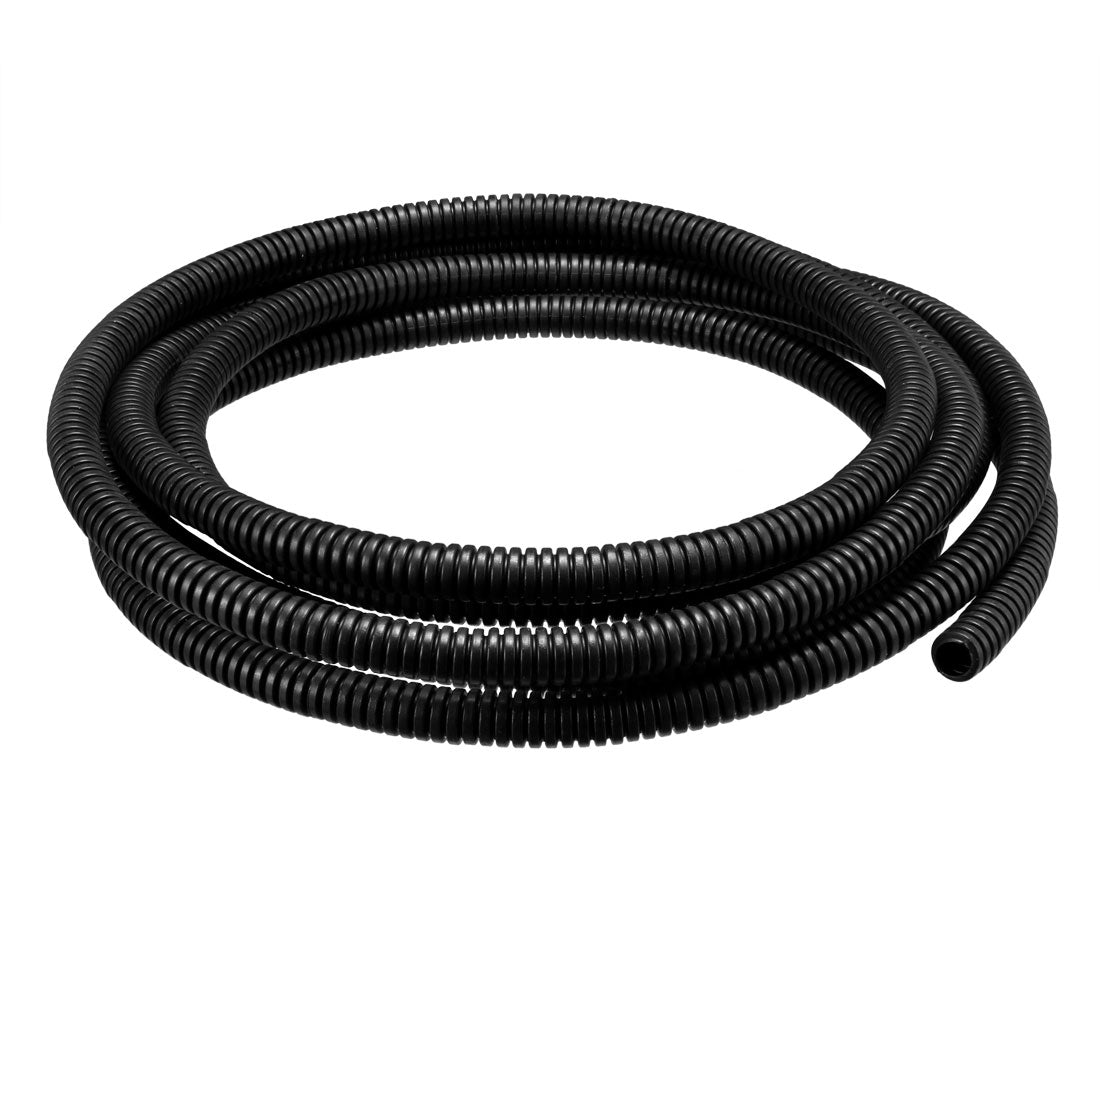 uxcell Uxcell 3 M 6.5 x 10 mm PP Flexible Corrugated Conduit Tube for Garden,Office Black